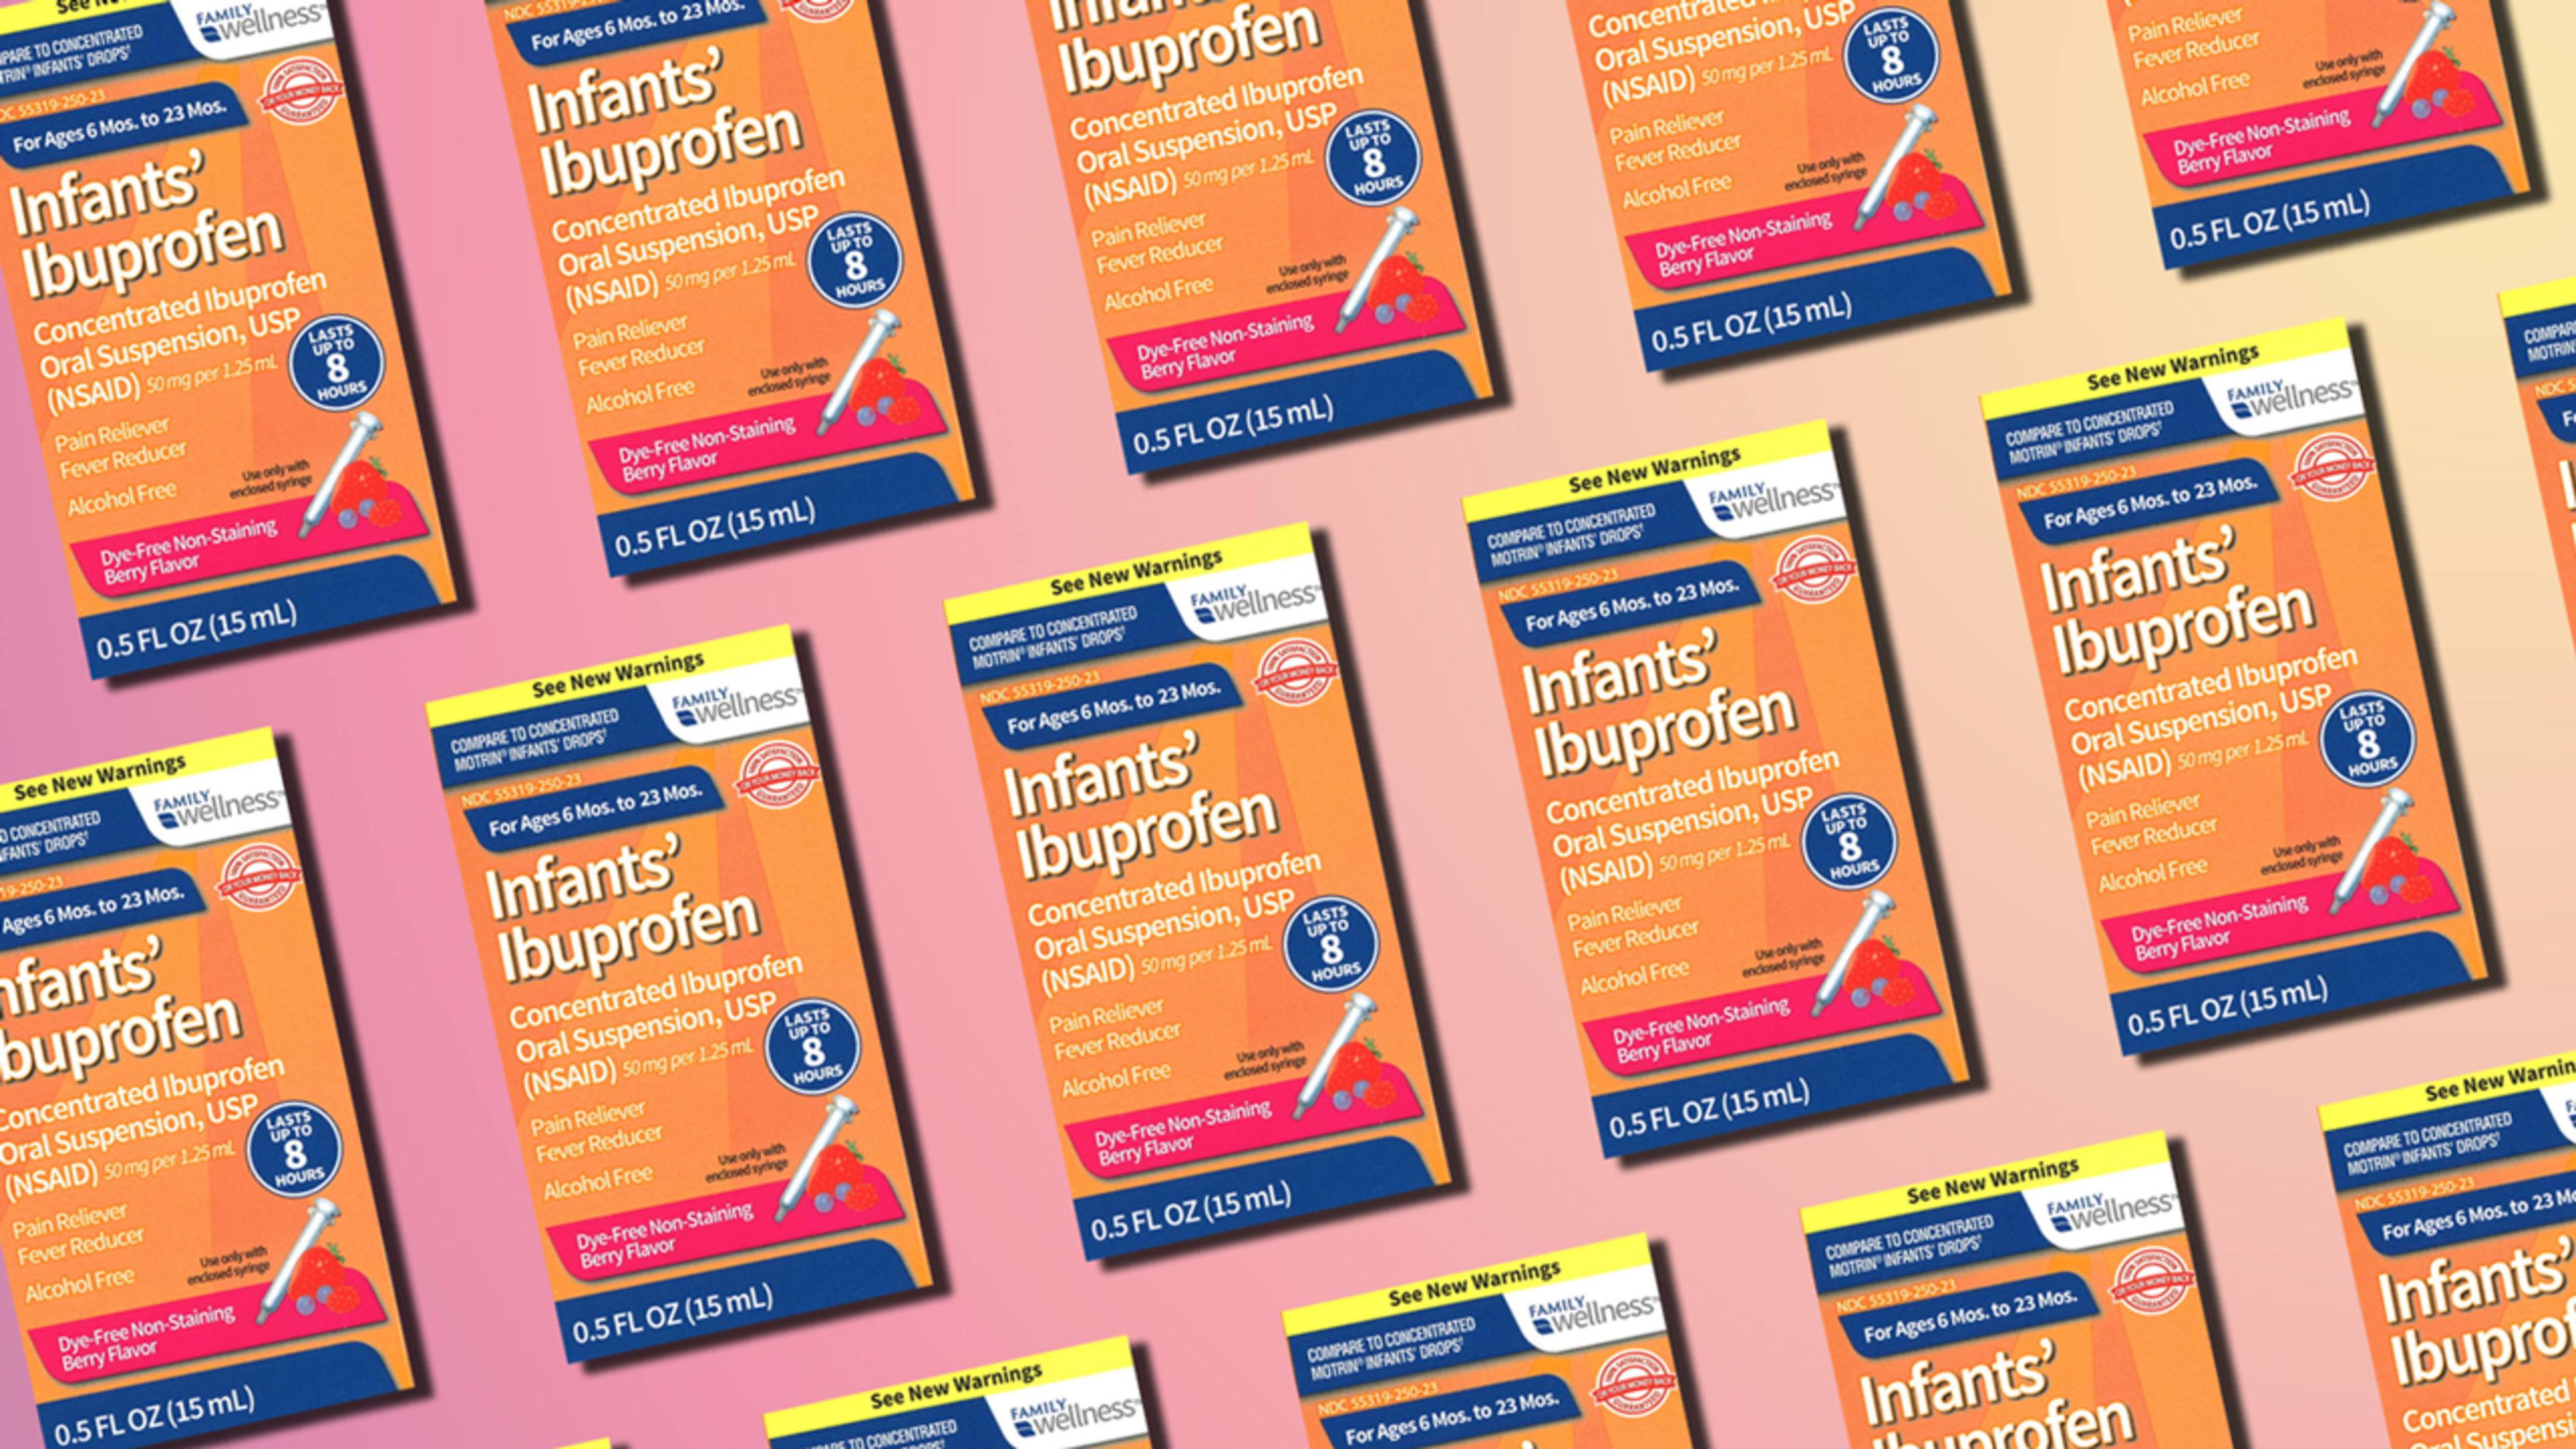 Infant ibuprofen recall affects products from CVS, Walmart, and Family Dollar